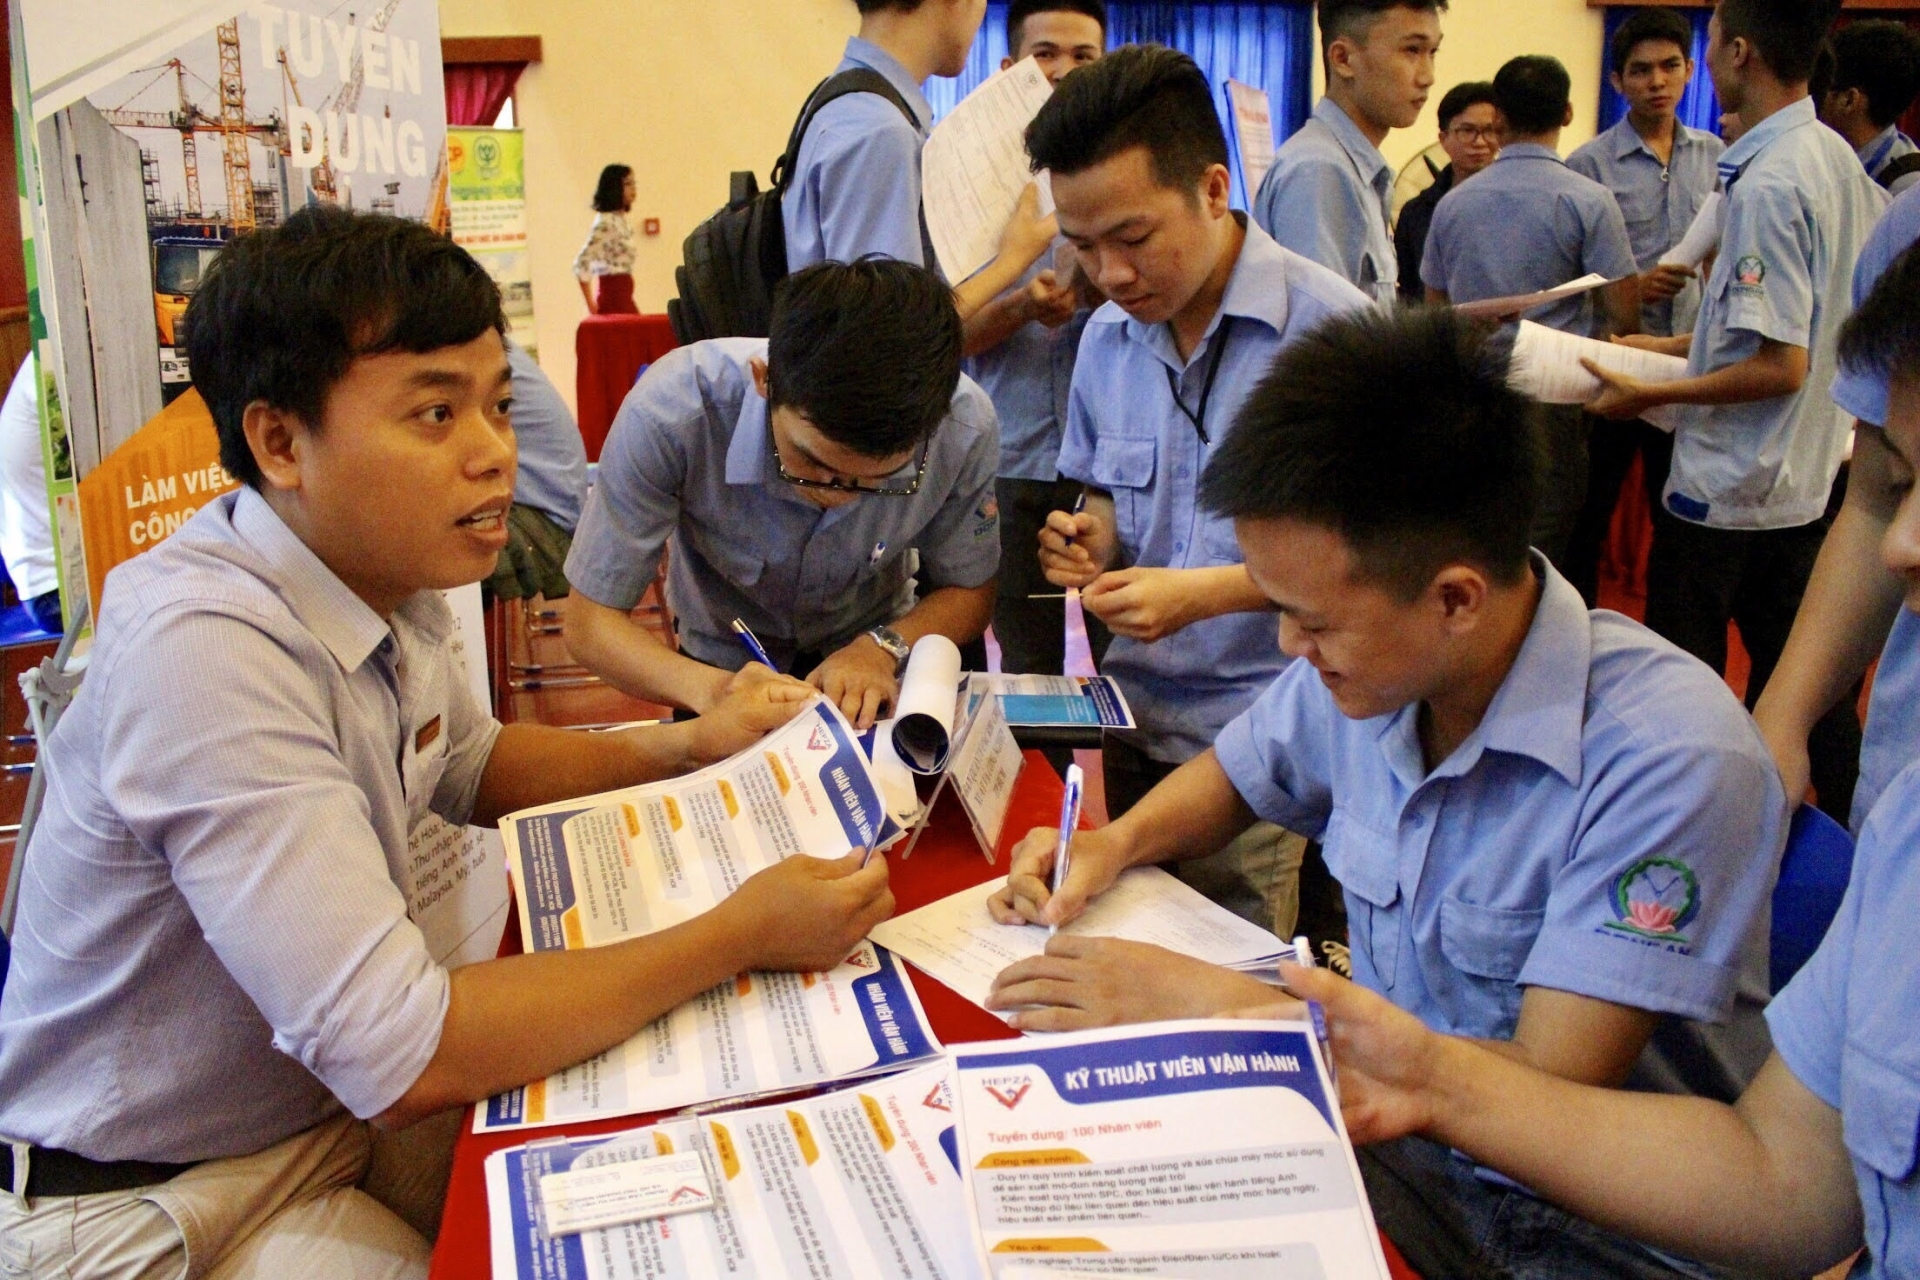 Approximately 540,000 jobs created in Vietnam during the first 6 months